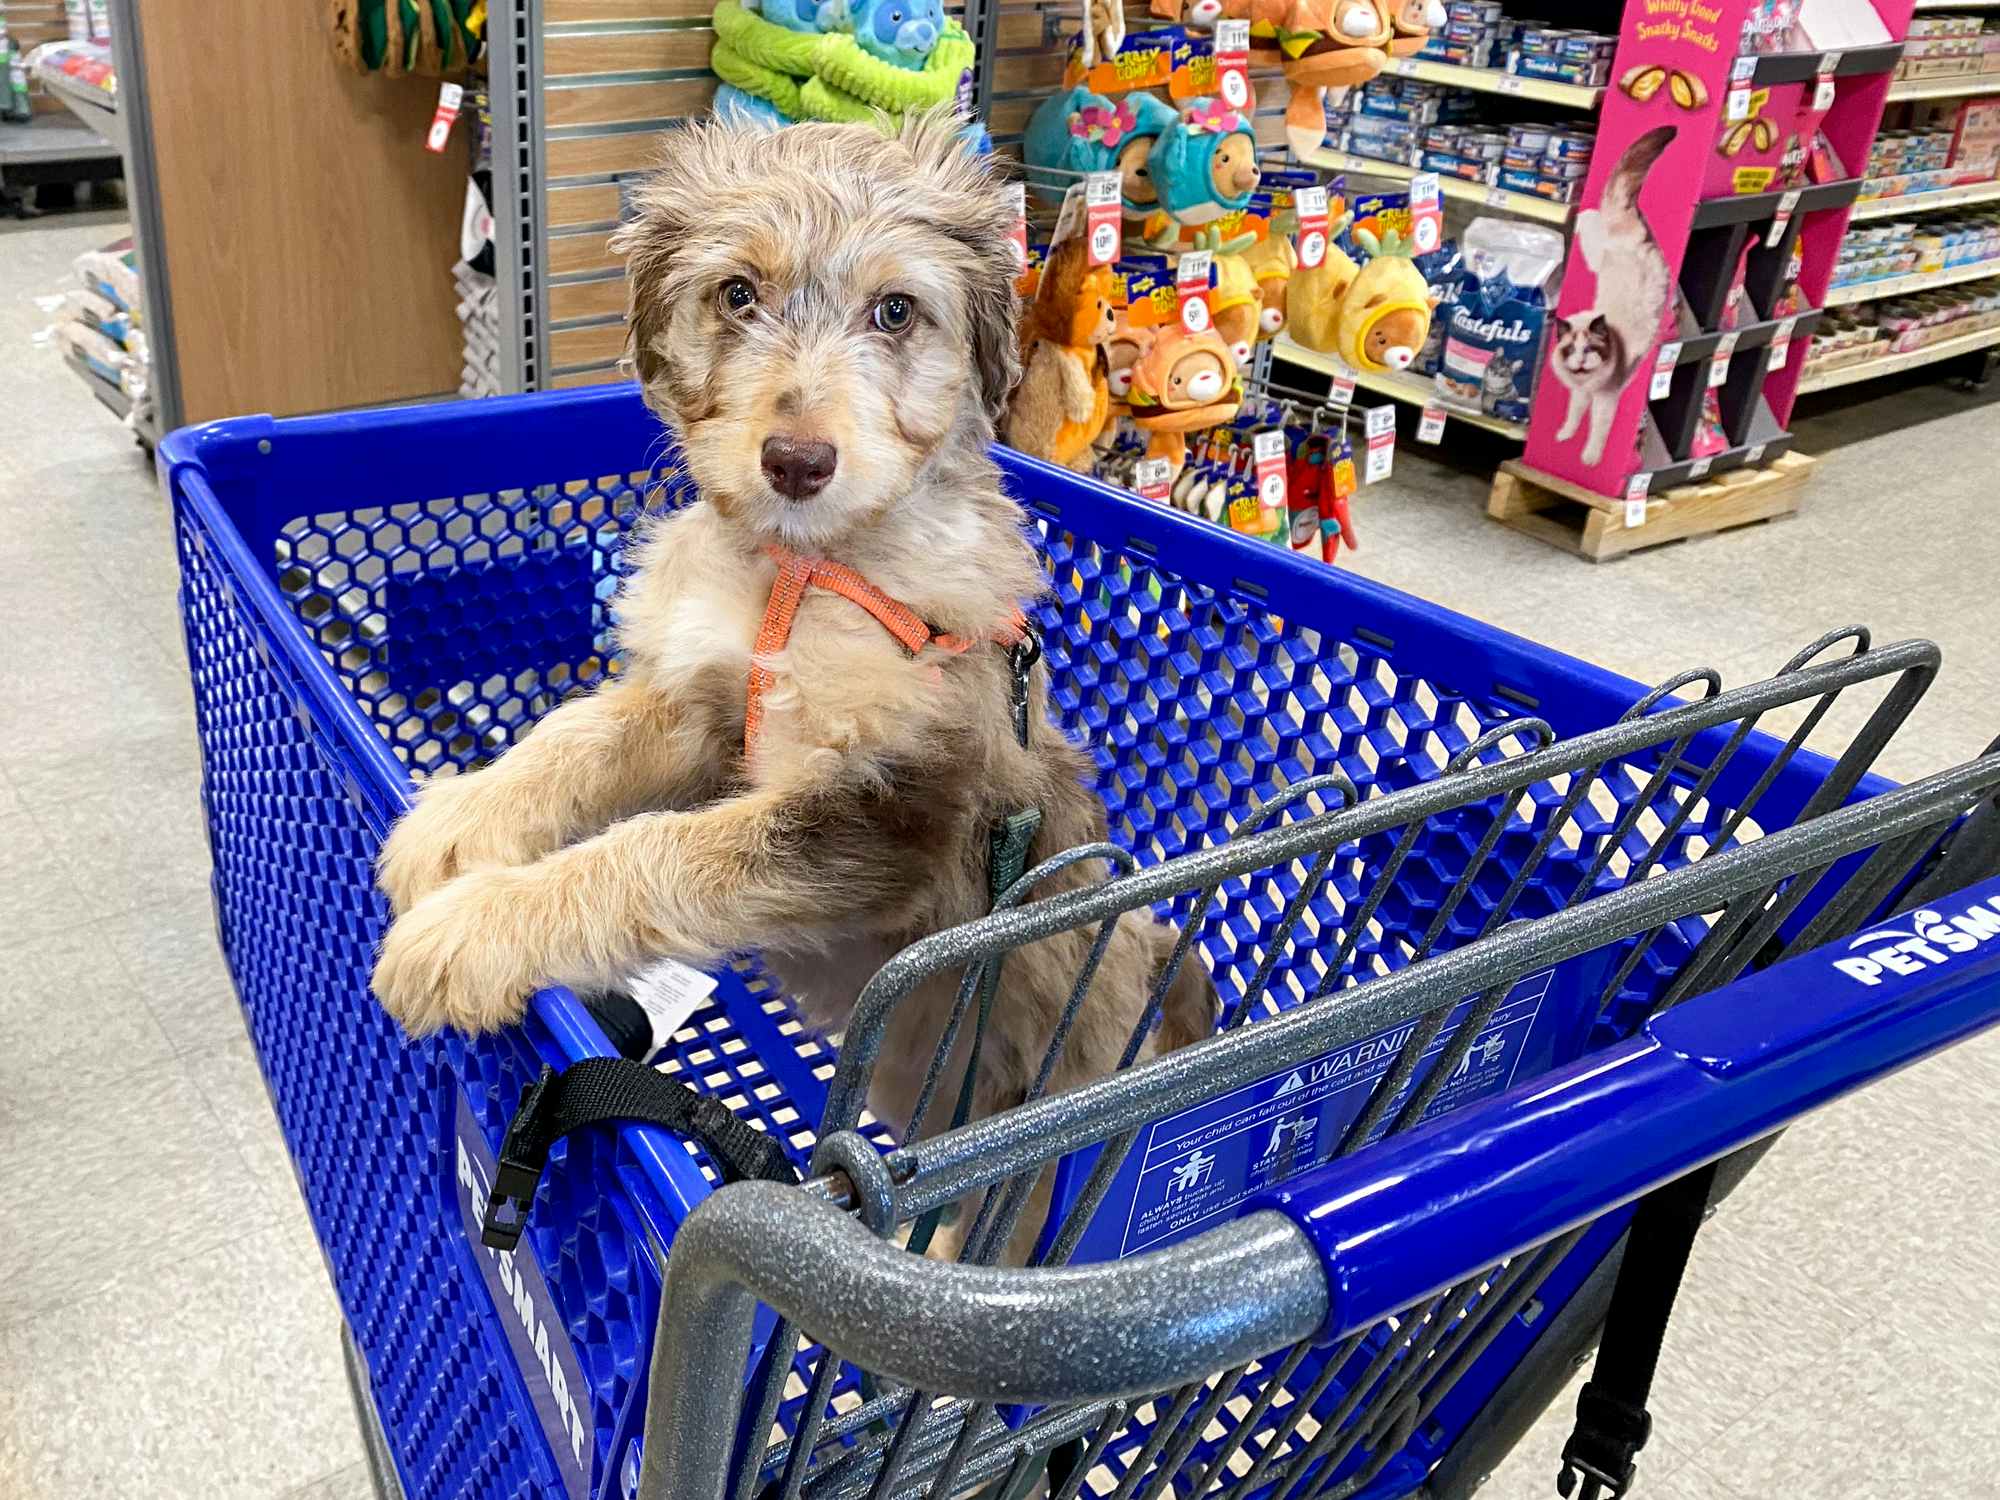 doodle puppy in blue petsmart shopping cart in store